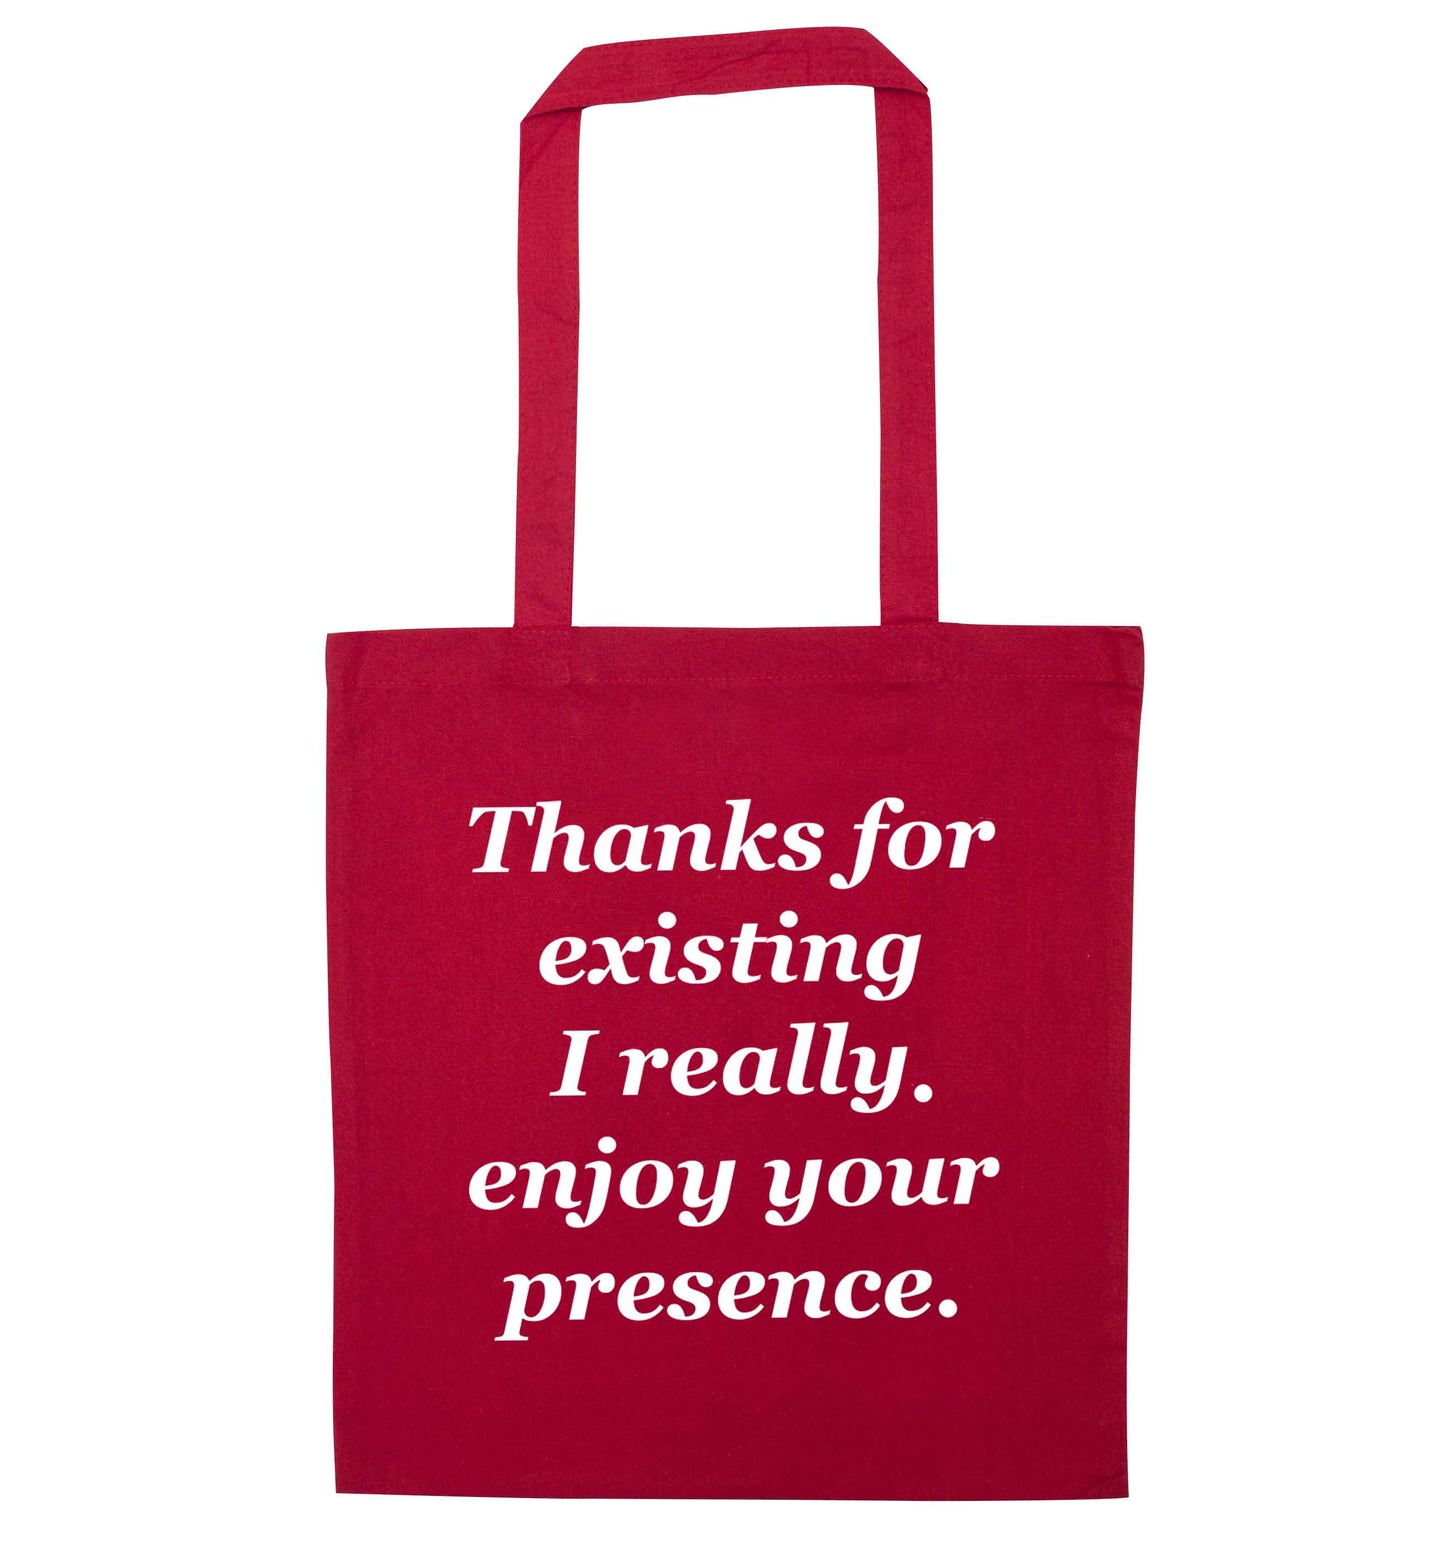 Thanks for existing I really enjoy your presence red tote bag